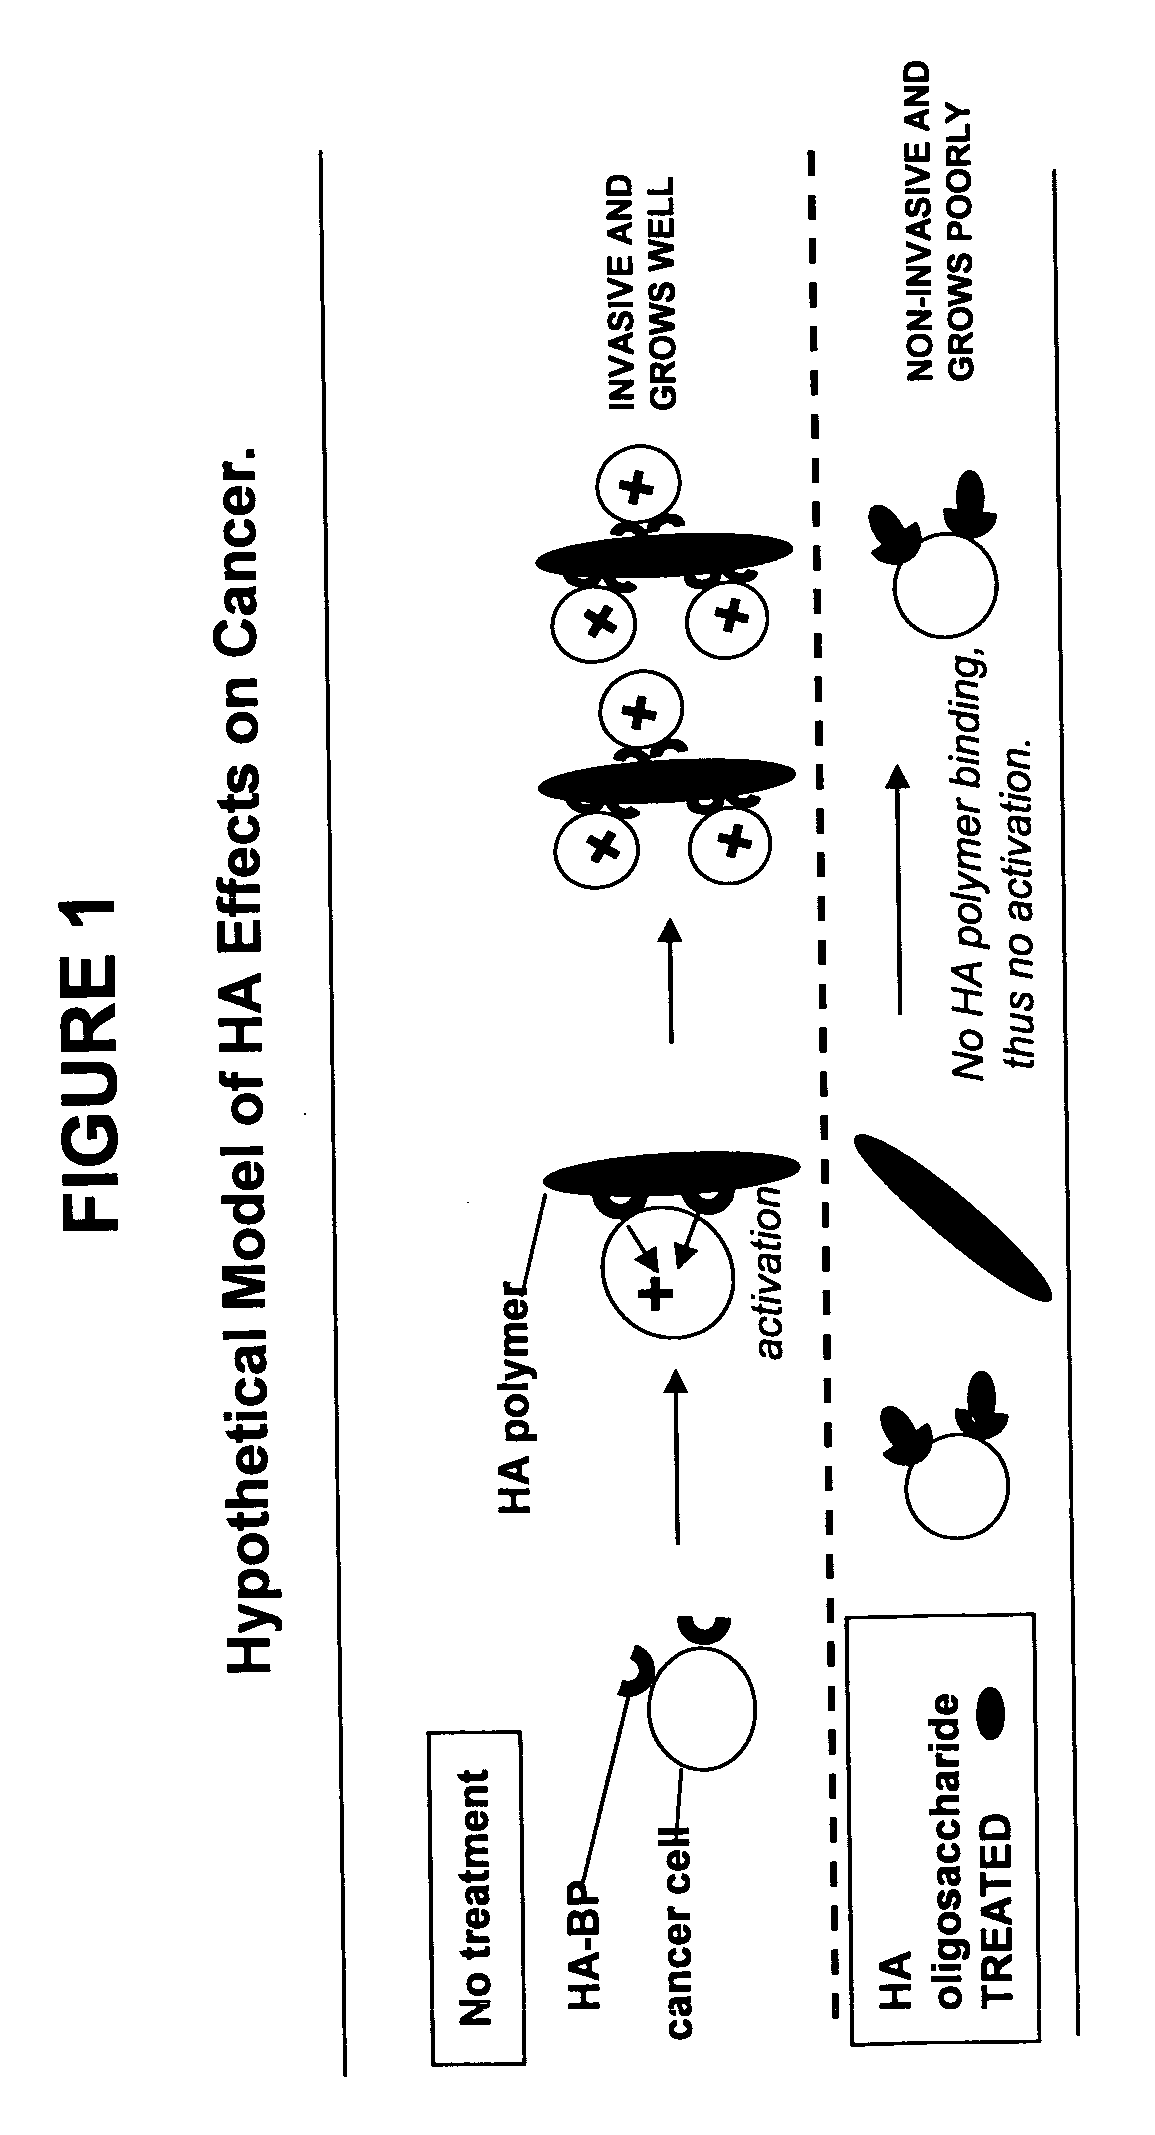 Methods of selectively treating diseases with specific glycosaminoglycan polymers